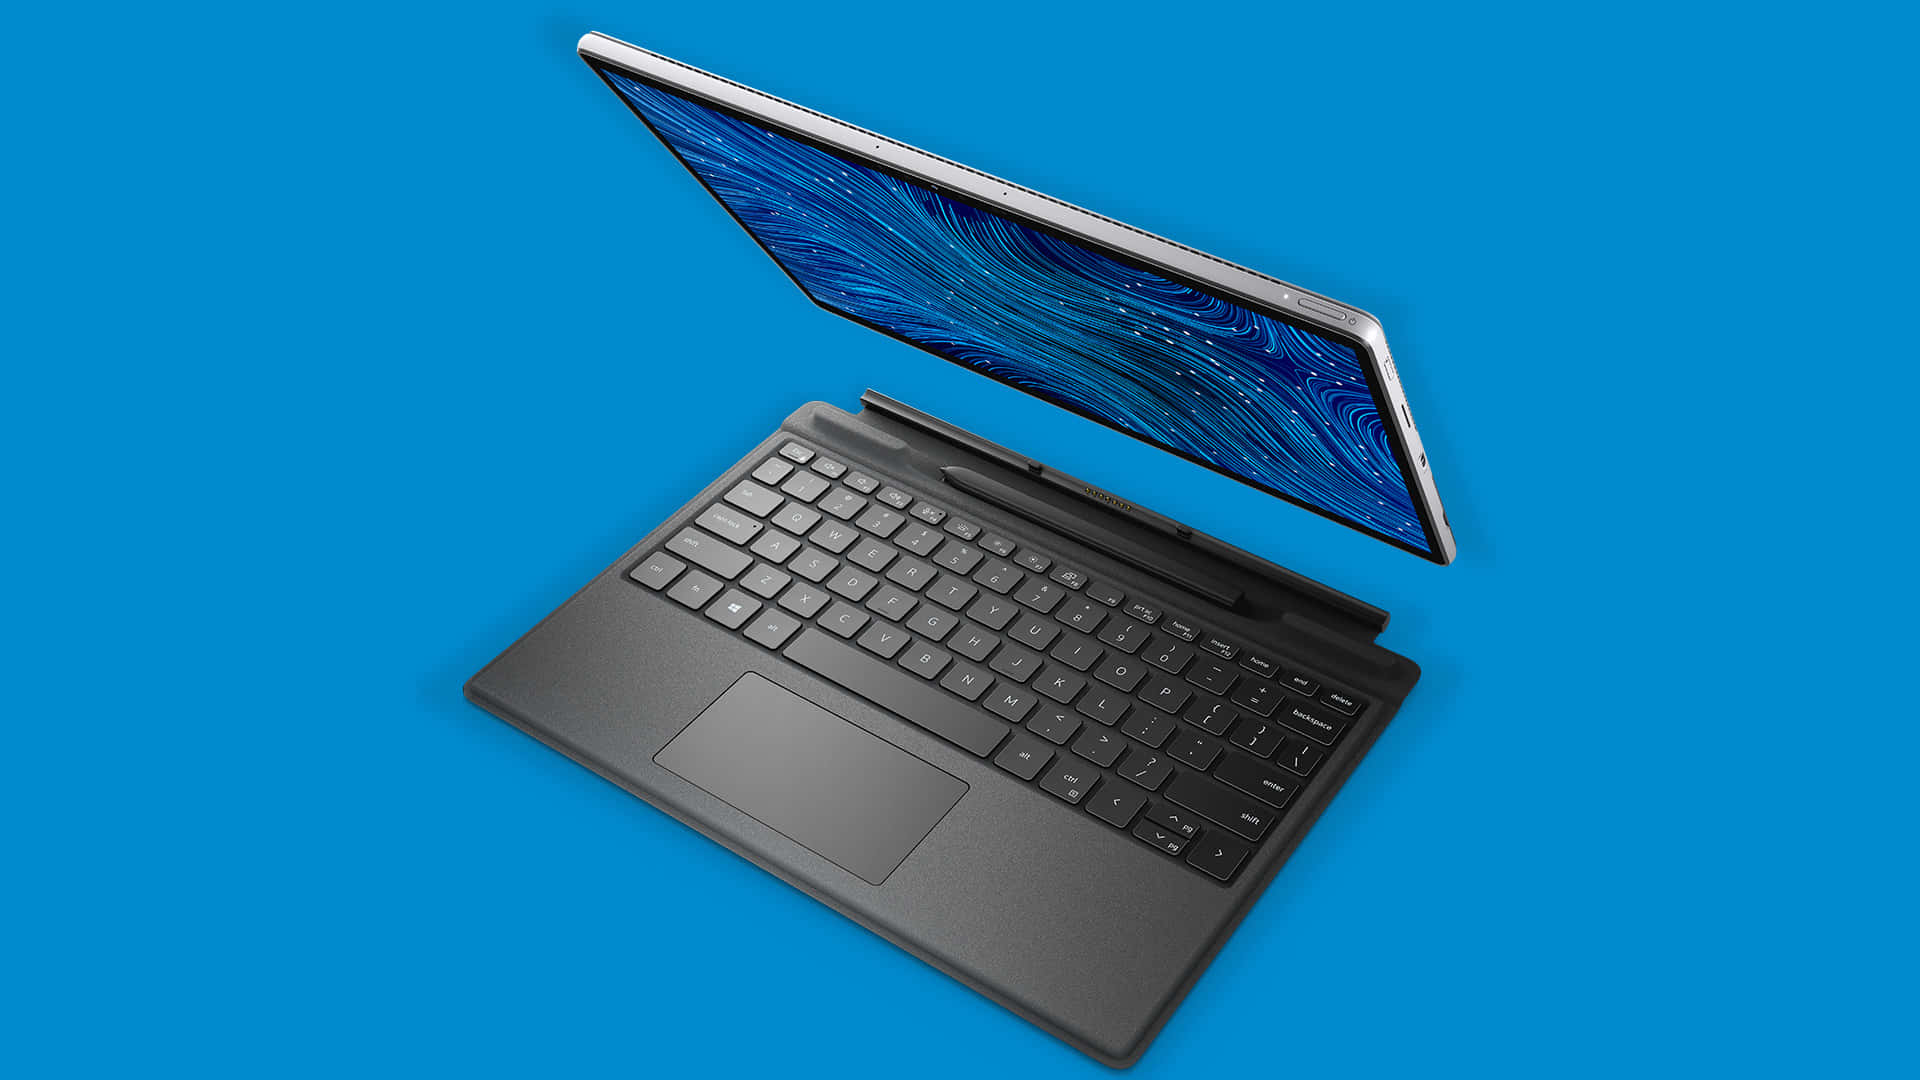 Enjoy Dell’s Performance on the Go